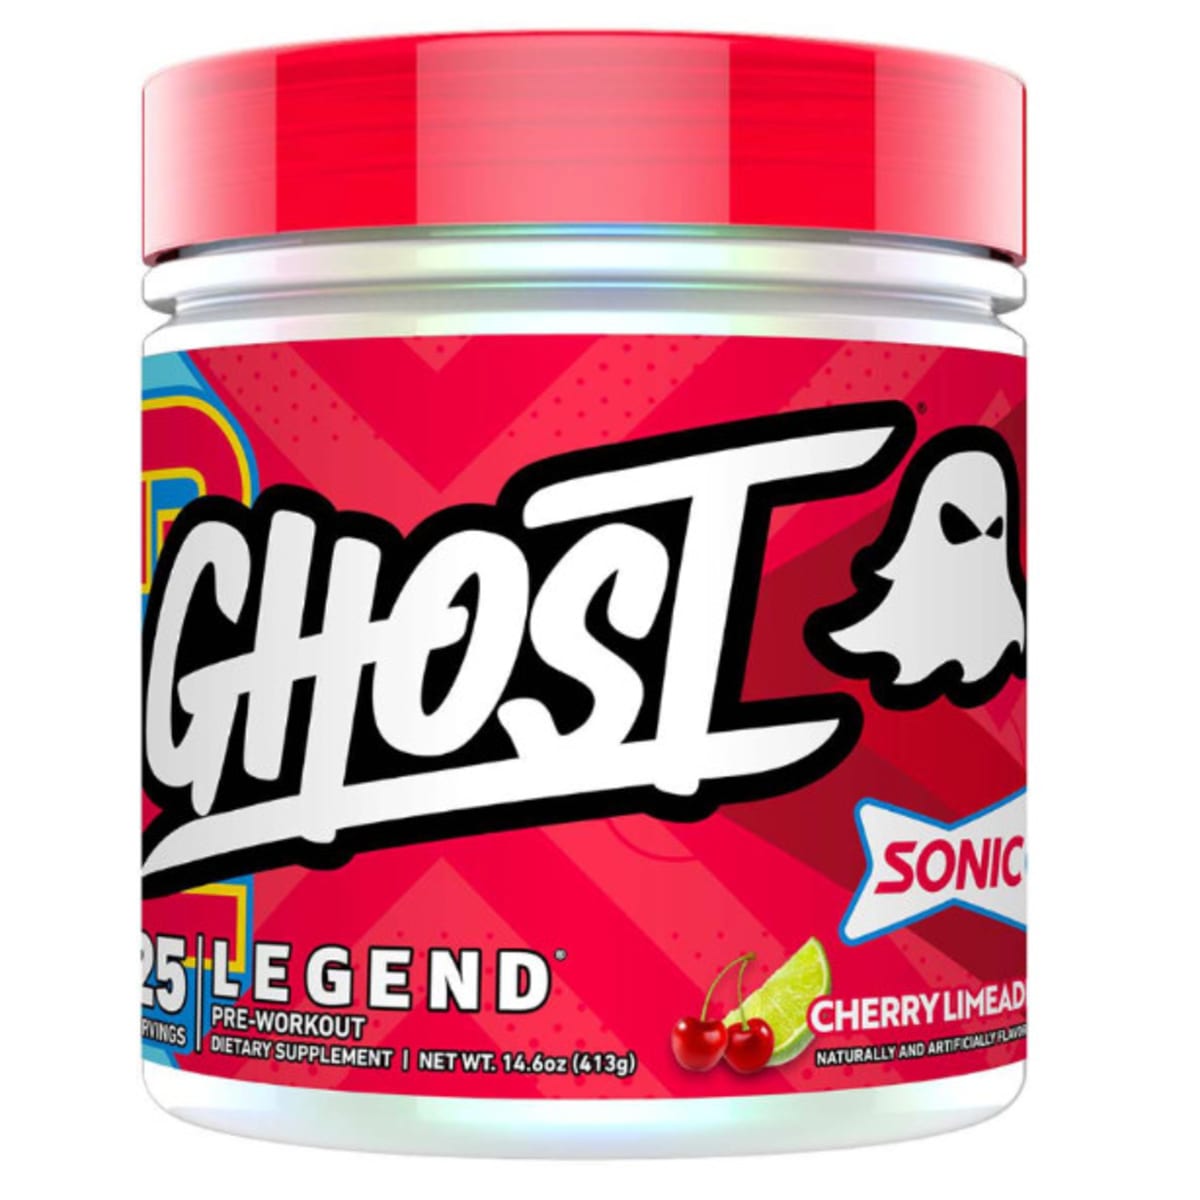 GHOST Hydration REVIEW #ghostlifestyle #hydration #review 